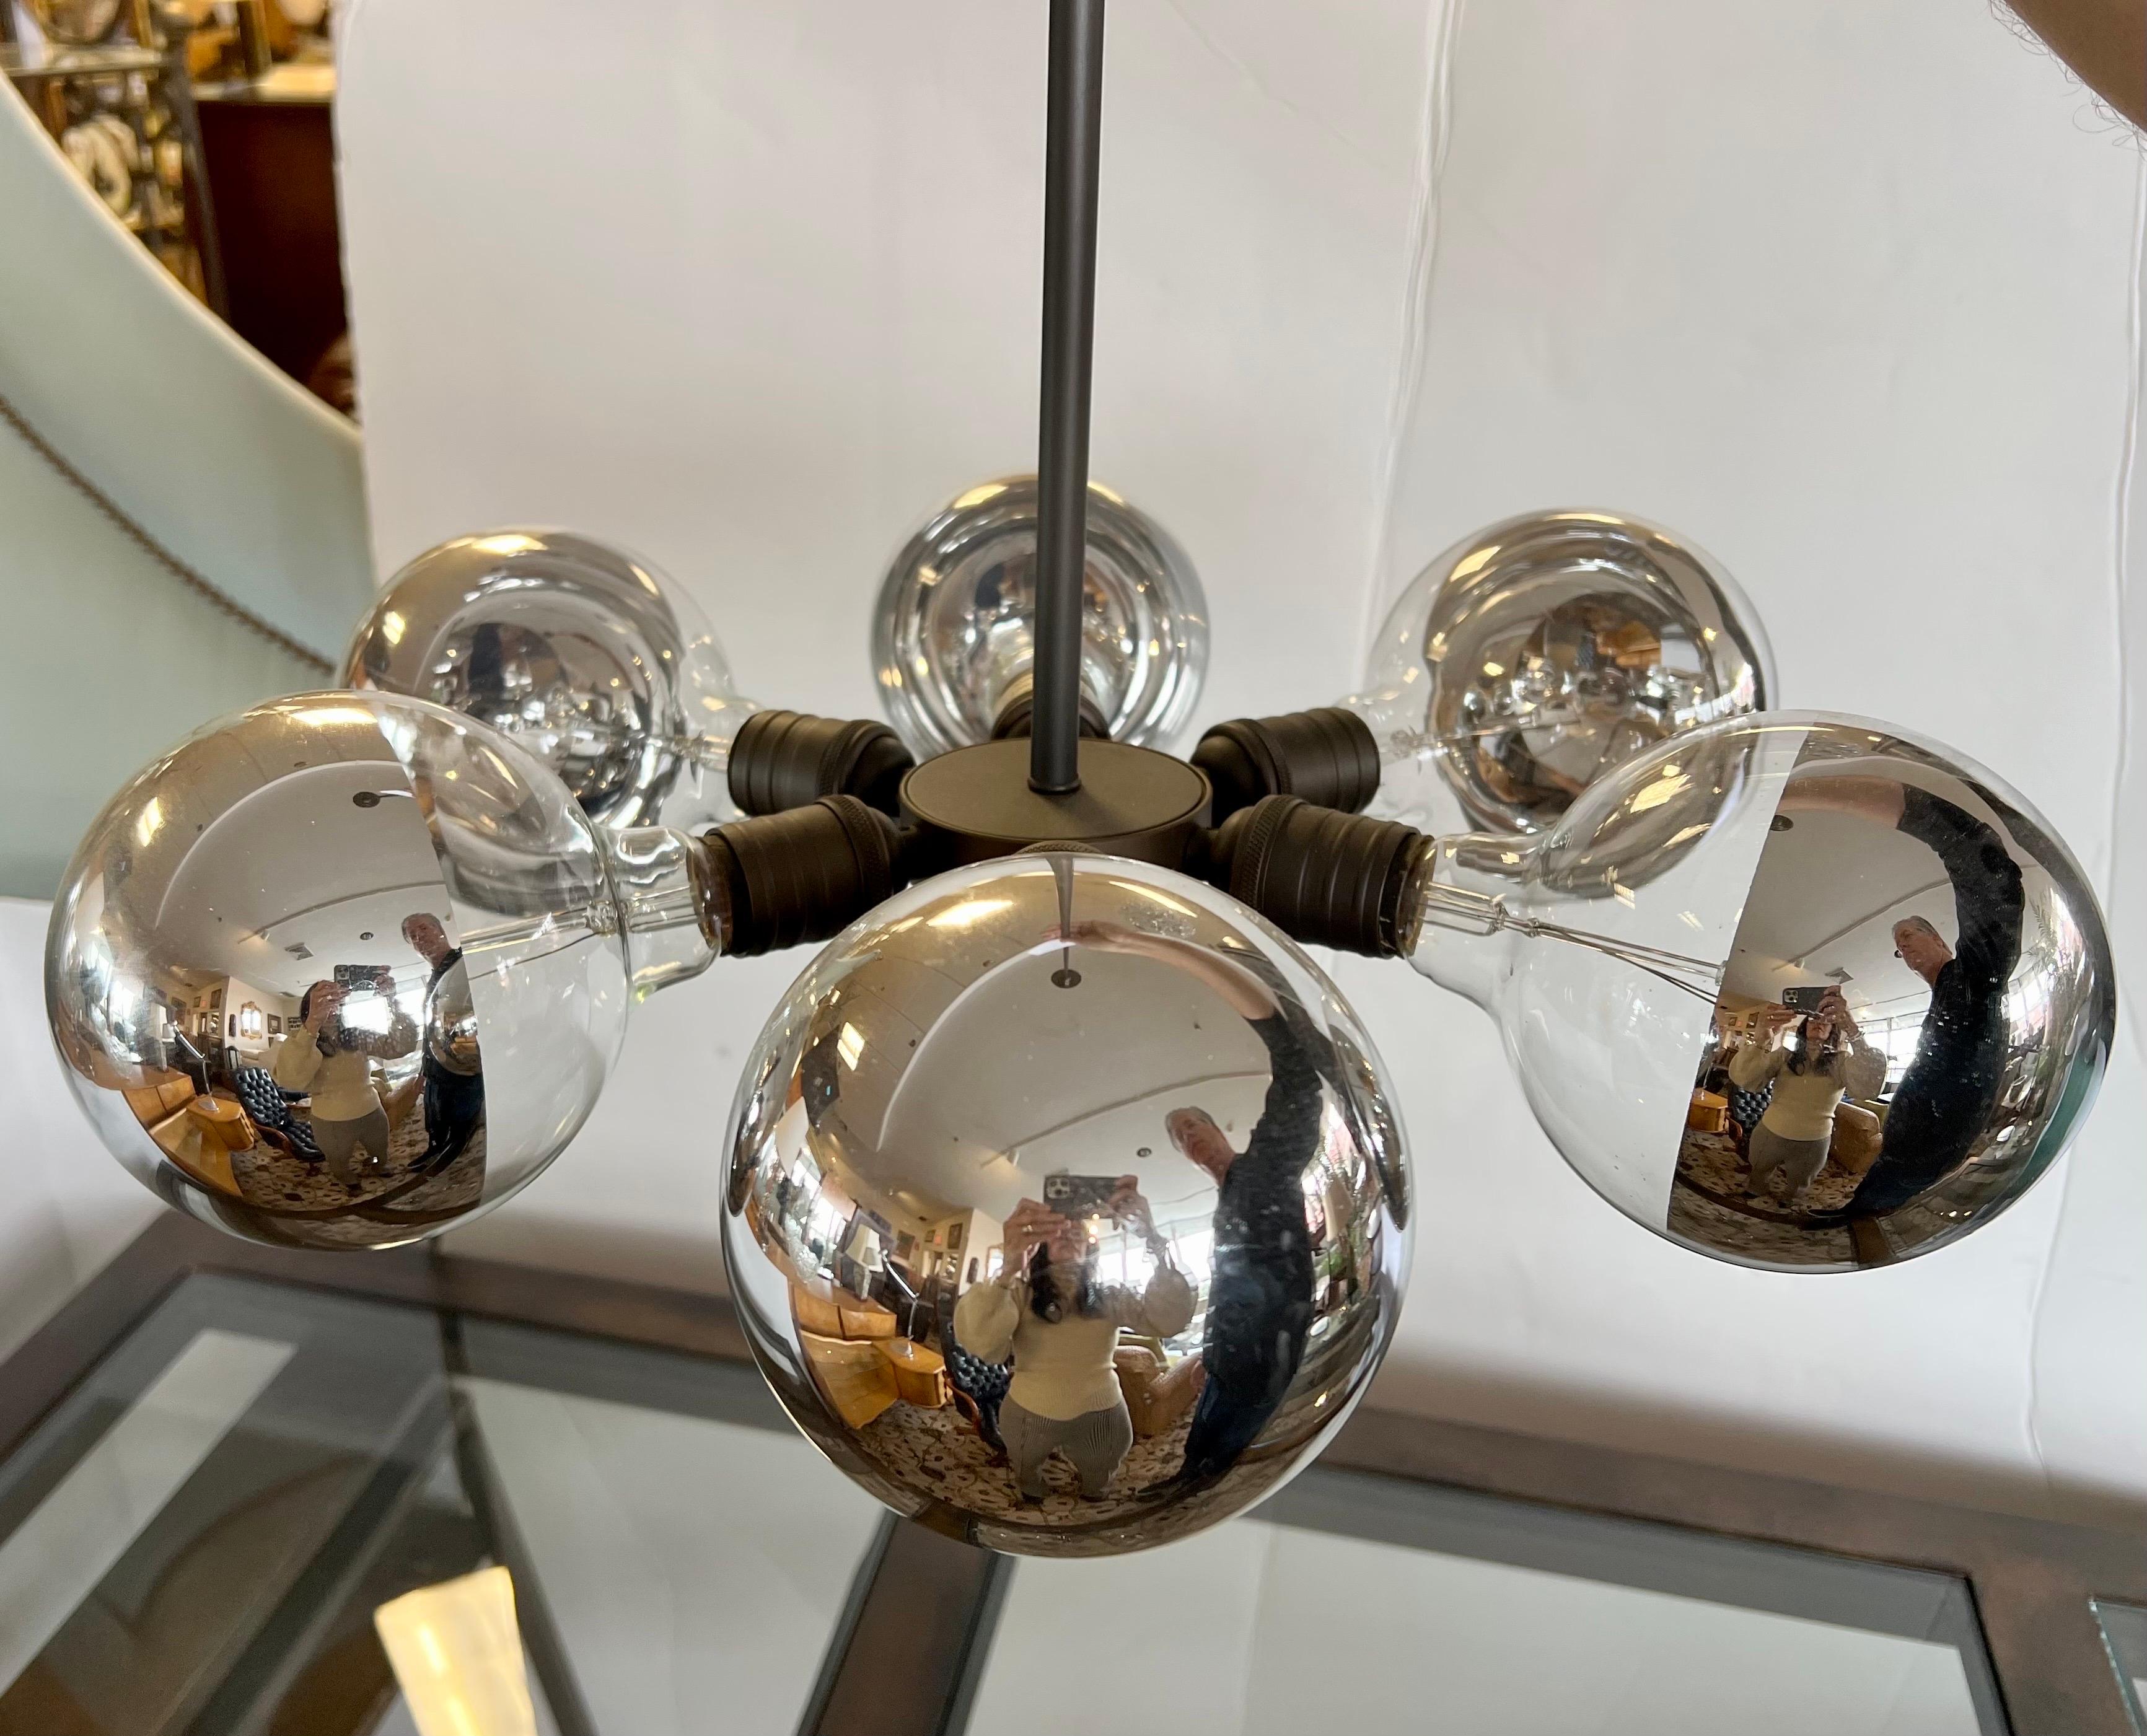 Iconic six light sputnik chandelier circa 1970's. Wired for USA and in perfect working order. The six sputnik bulbs form an atom which is round and connected by center pole. The dimensions below include the height of the pole in the overall height.